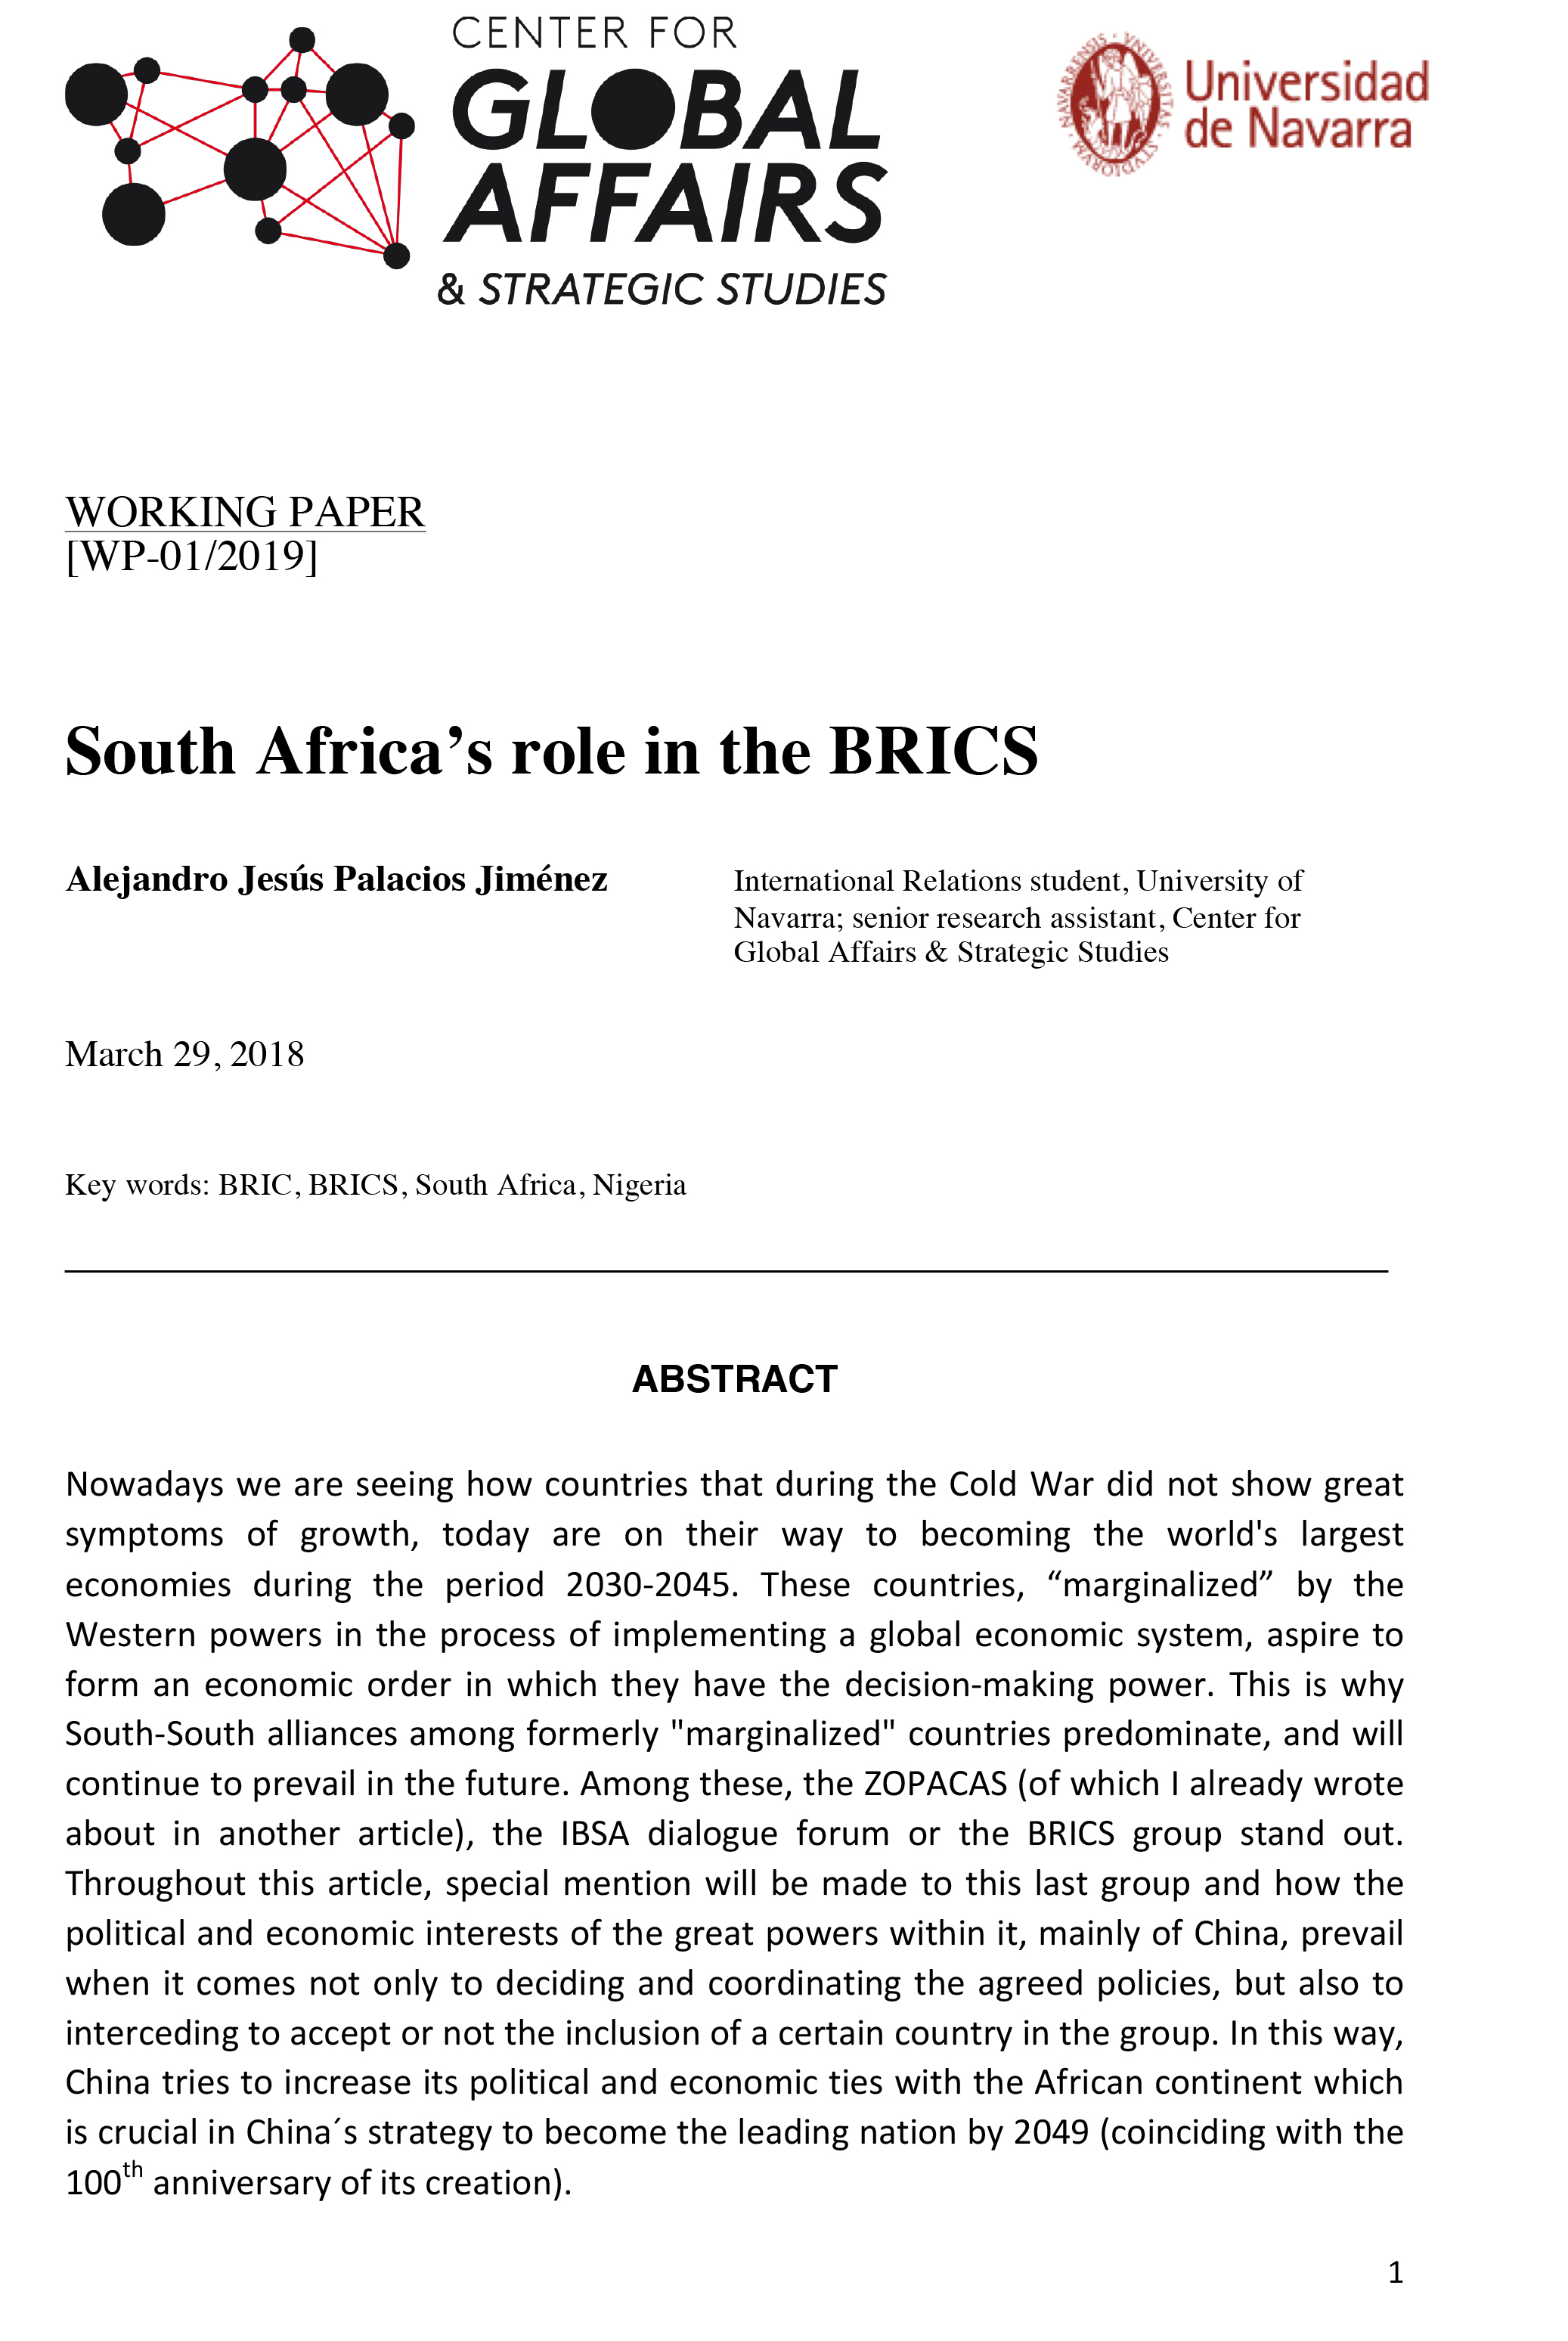 South Africa’s role in the BRICS